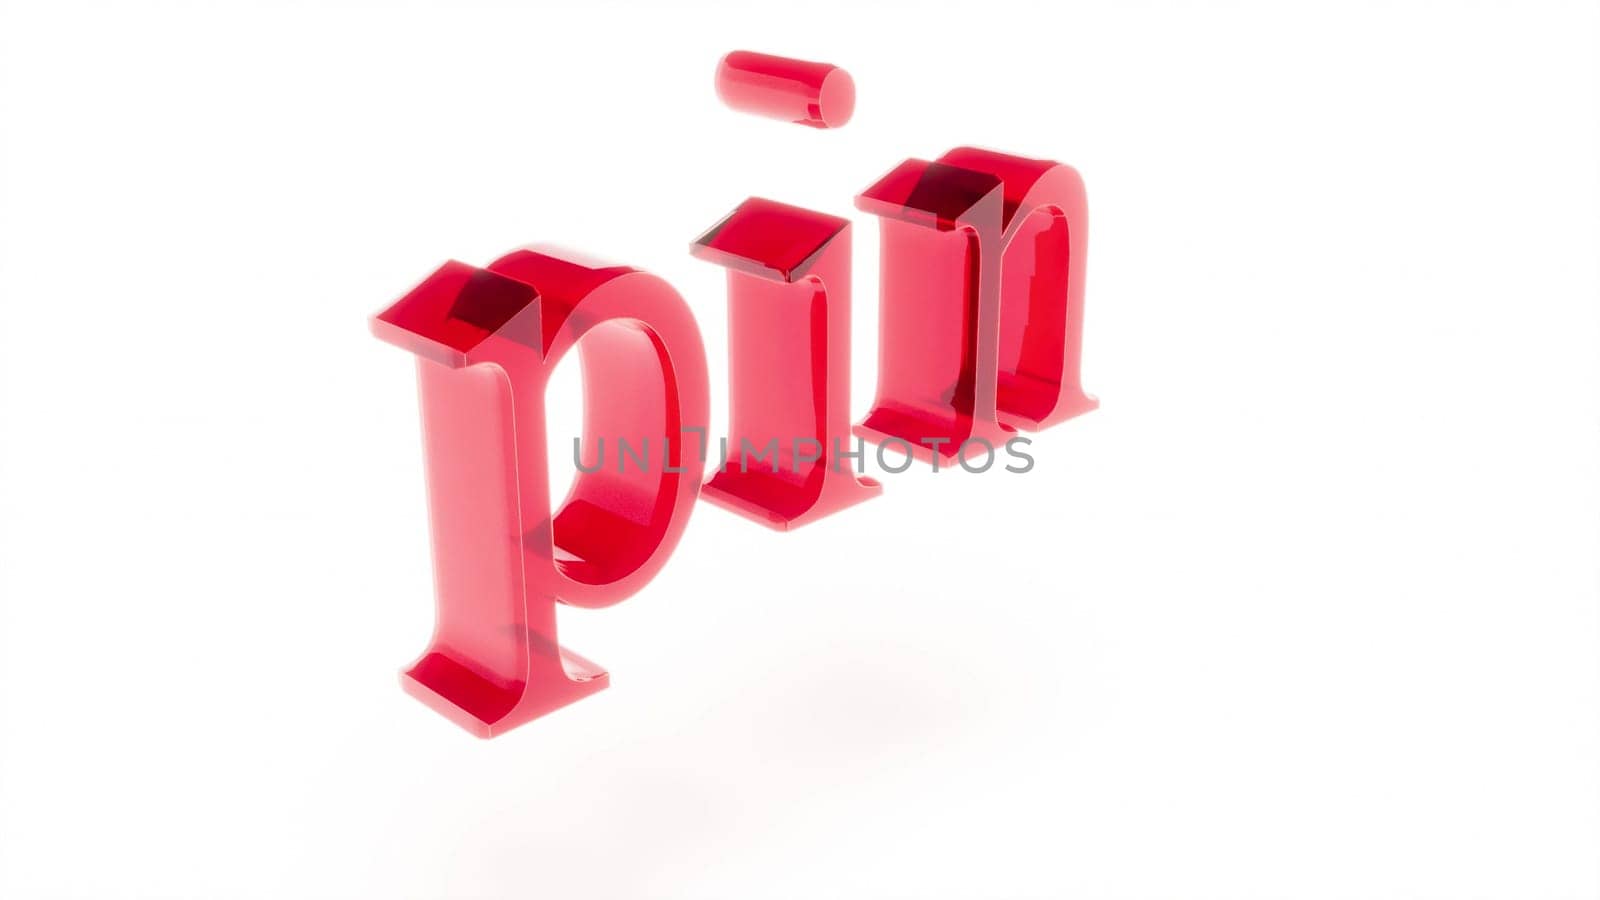 Color glass text PIN code password rotate on white back 3d render by Zozulinskyi